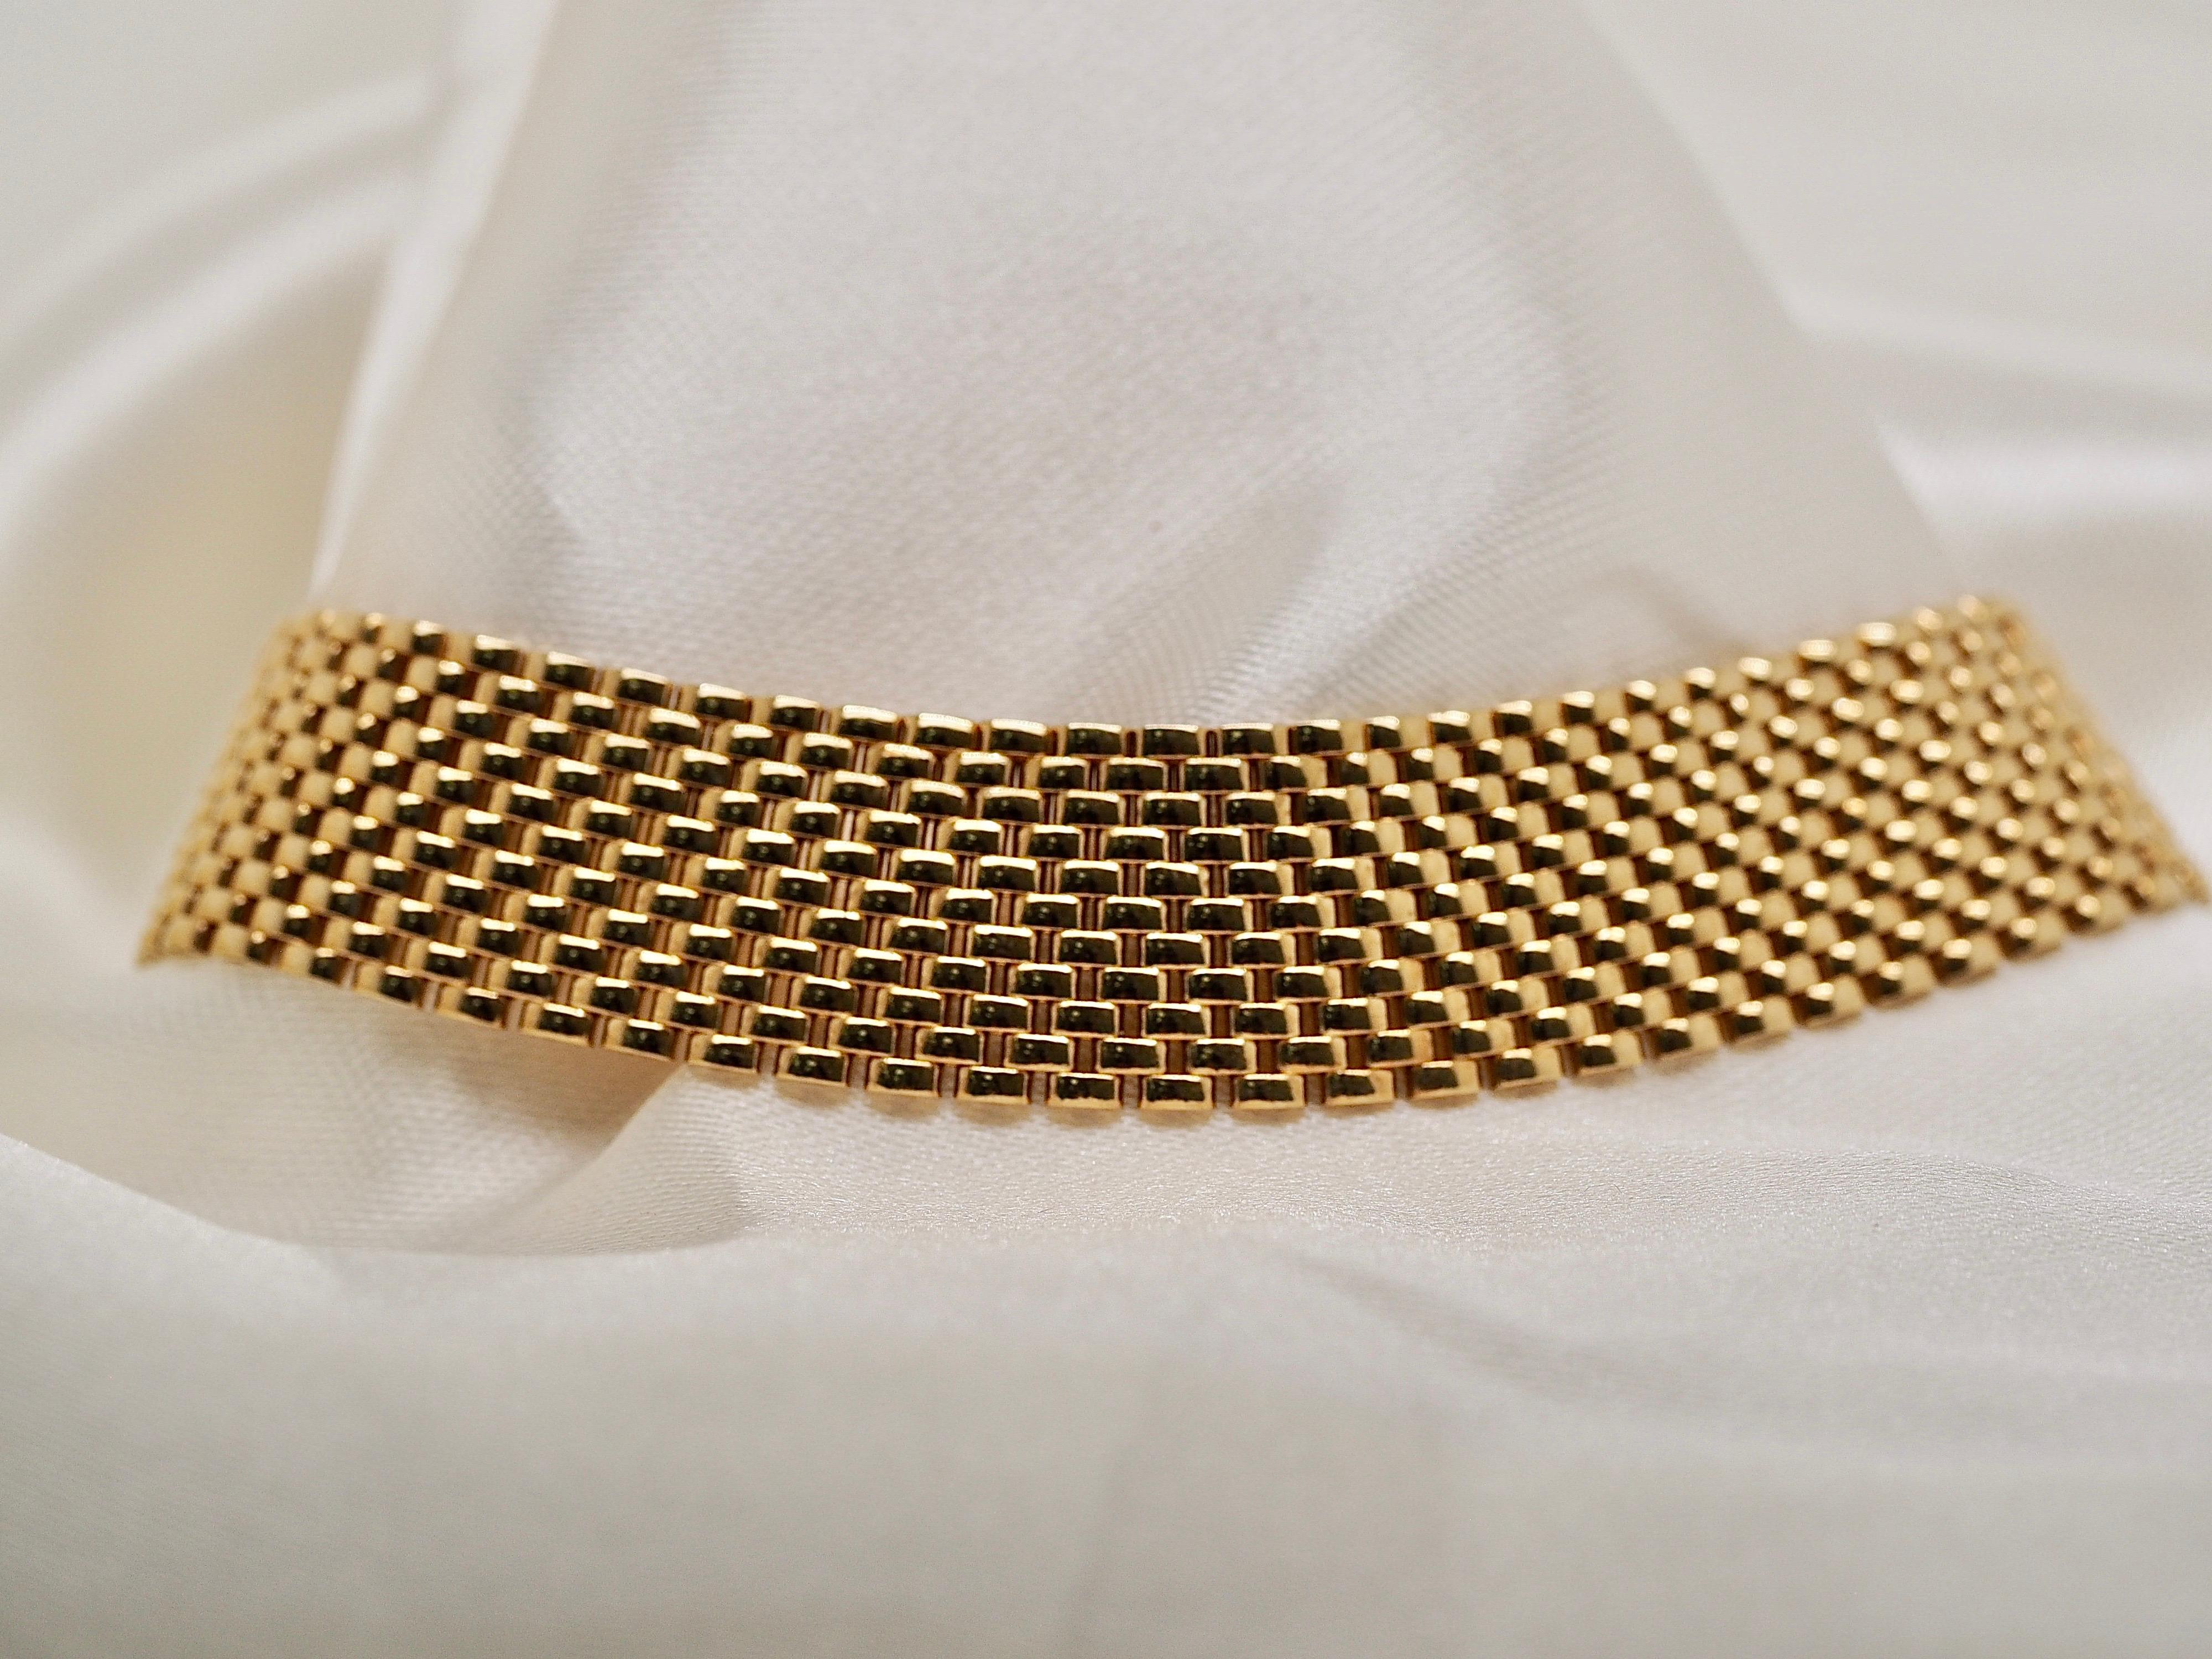 Retro 18 Karat Yellow Gold Wheat Mesh Bracelet, Italian Vintage. This Mesh vintage bracelet is in excellent condition and is a true one of a kind piece. The way this lays is absolute perfection conforming to the perfect fit.

Item Details:
Metal